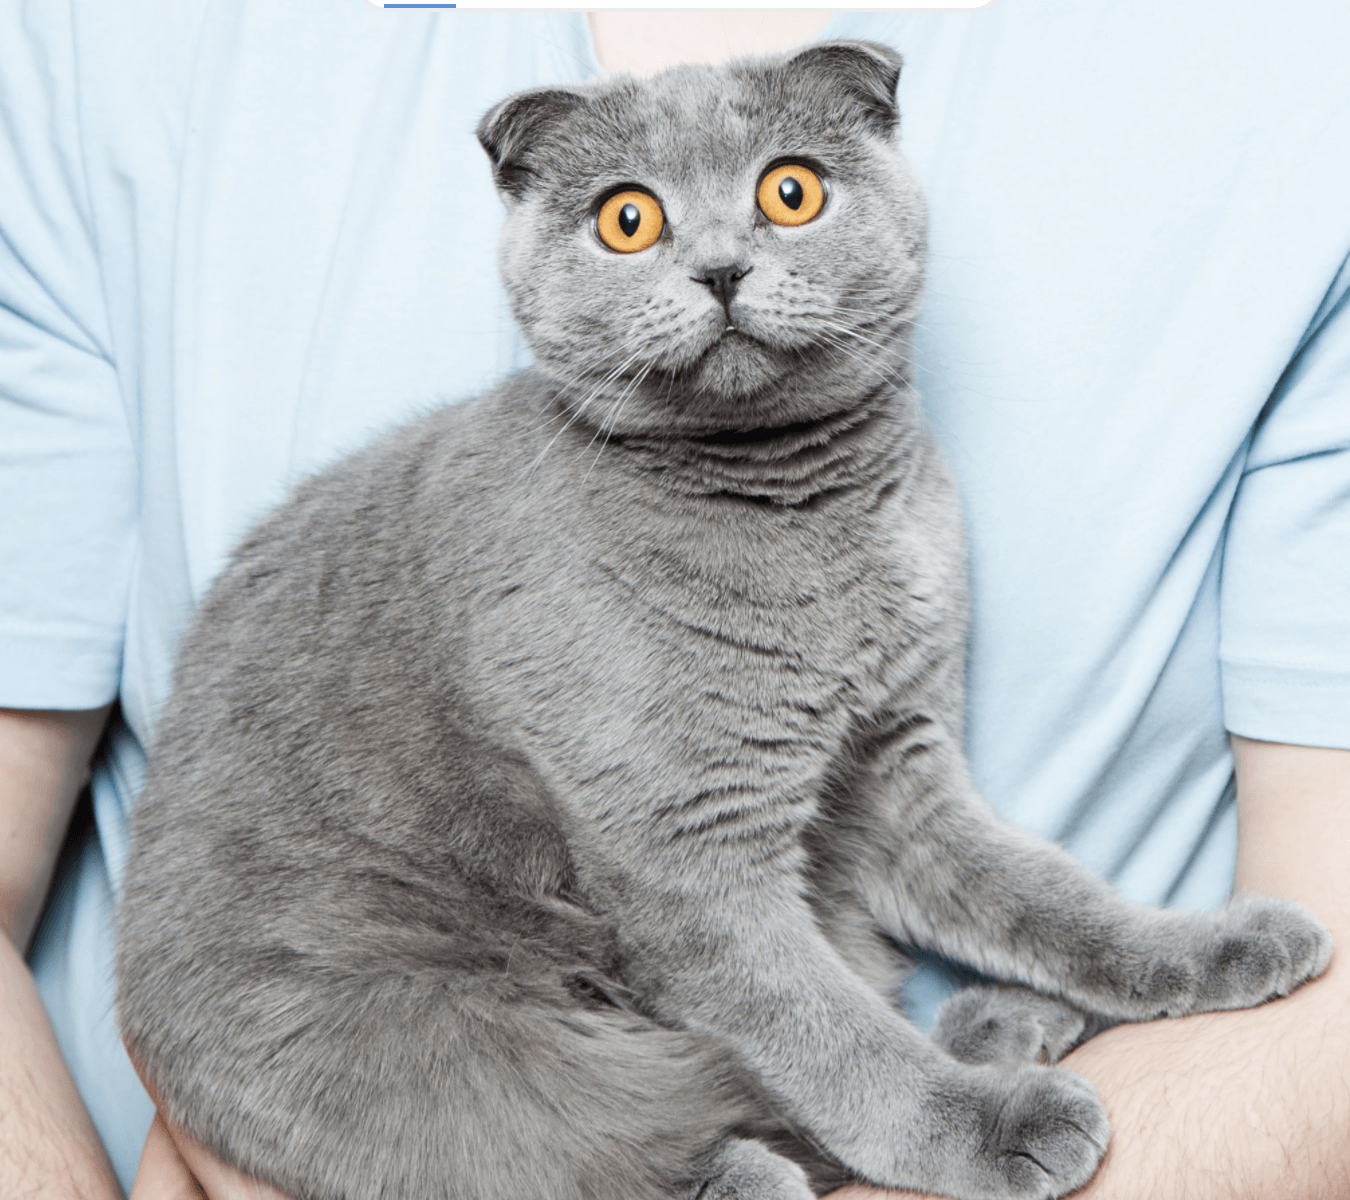 Can Cat Litter Cause Diarrhea in Your Kitty?